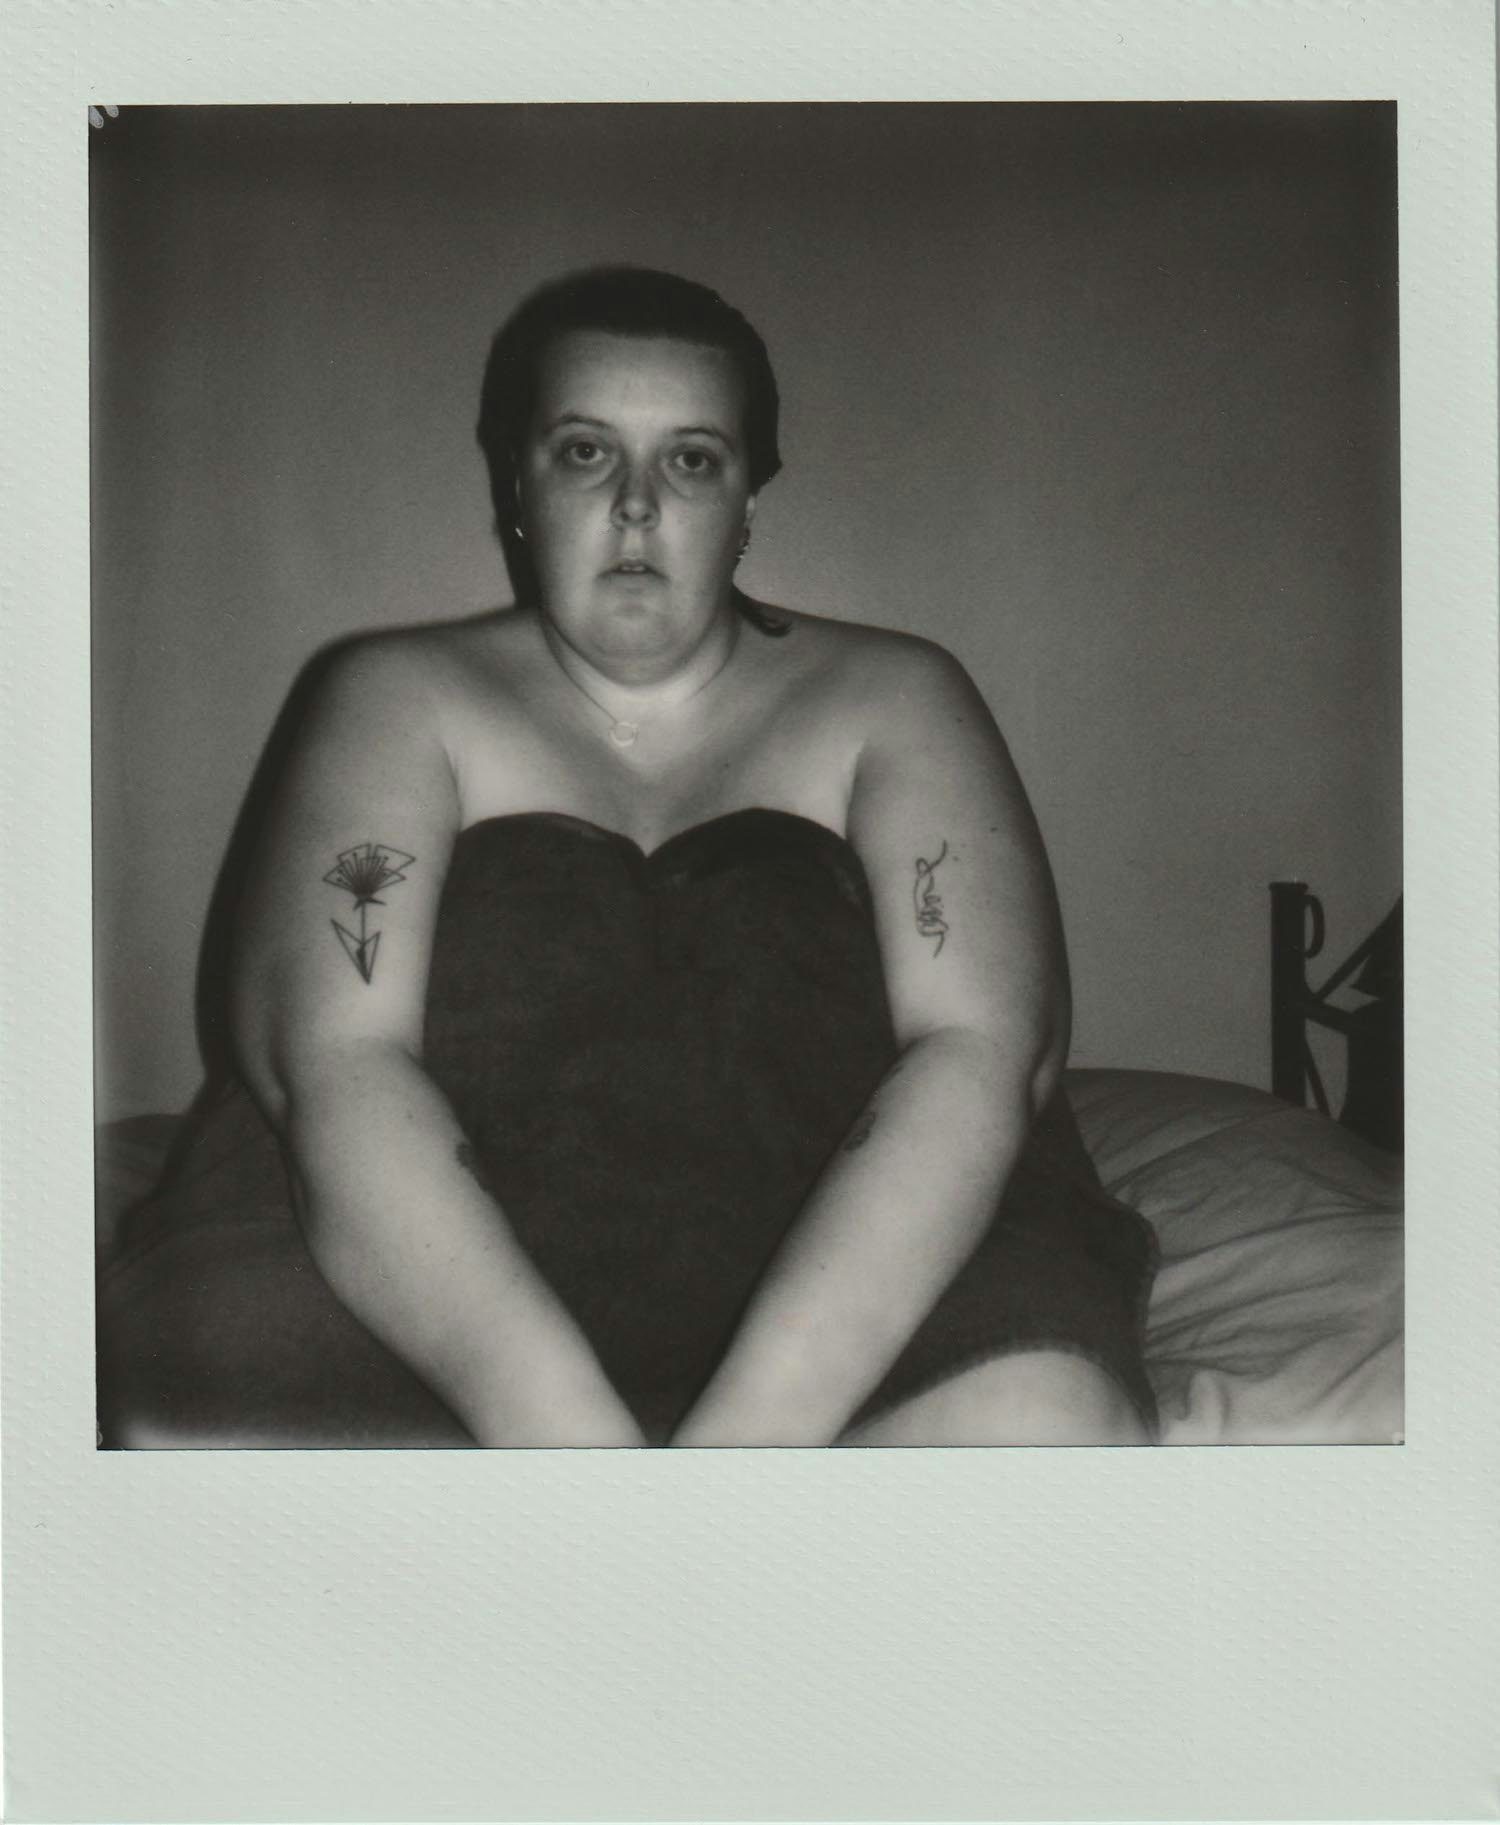 Photographer Sophie Mayanne's new personal project celebrates imperfection  (NSFW)